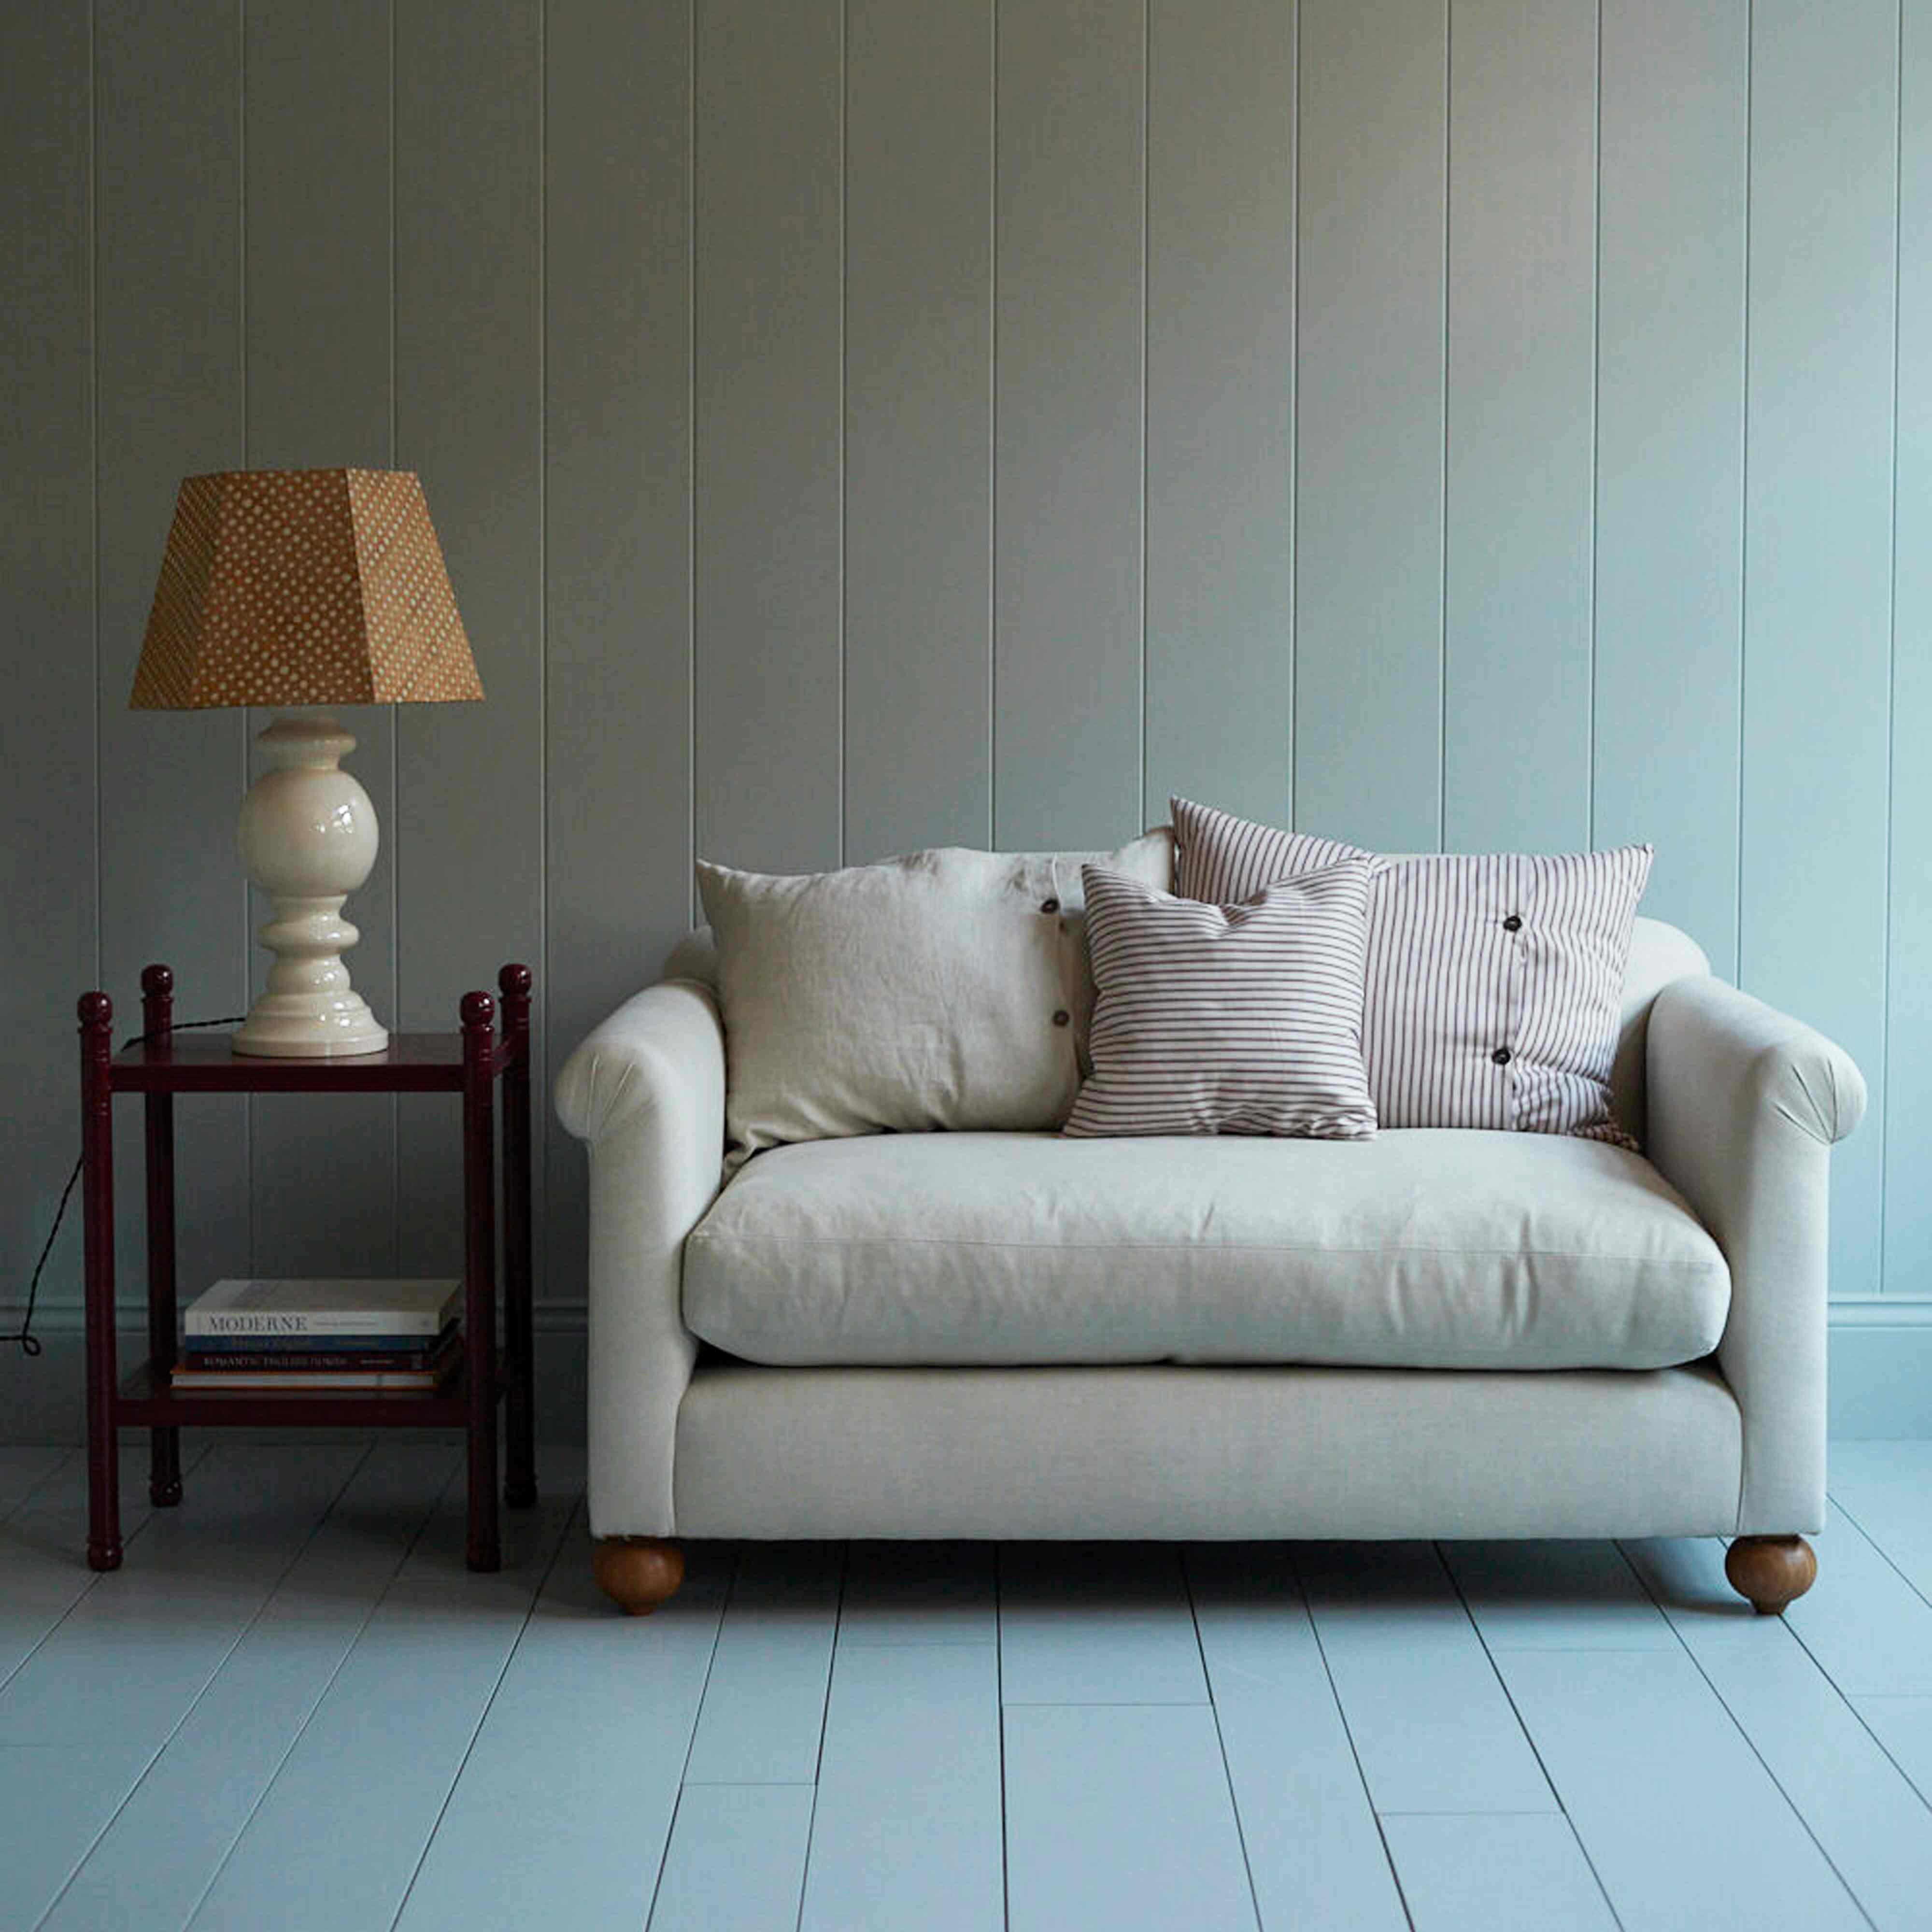  Dolittle 2 Seater Sofa in Laidback Linen Mineral 